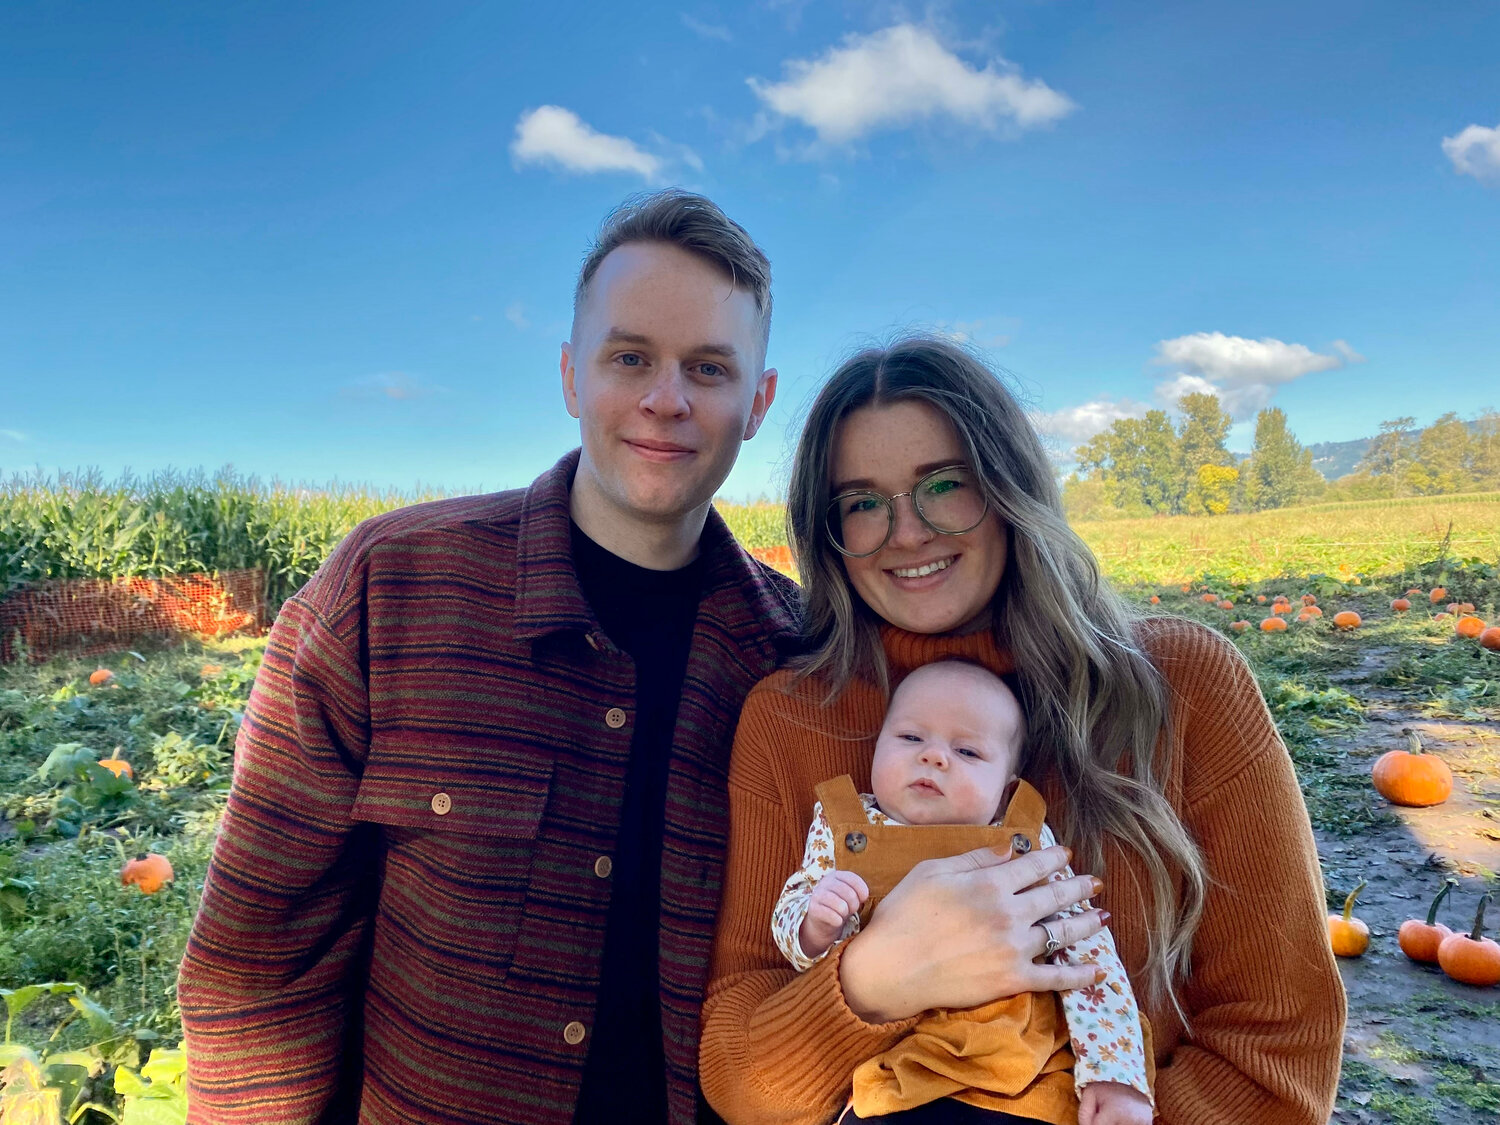 Danny and Robyn pose for a photo with Juniper at a pumpkin patch.